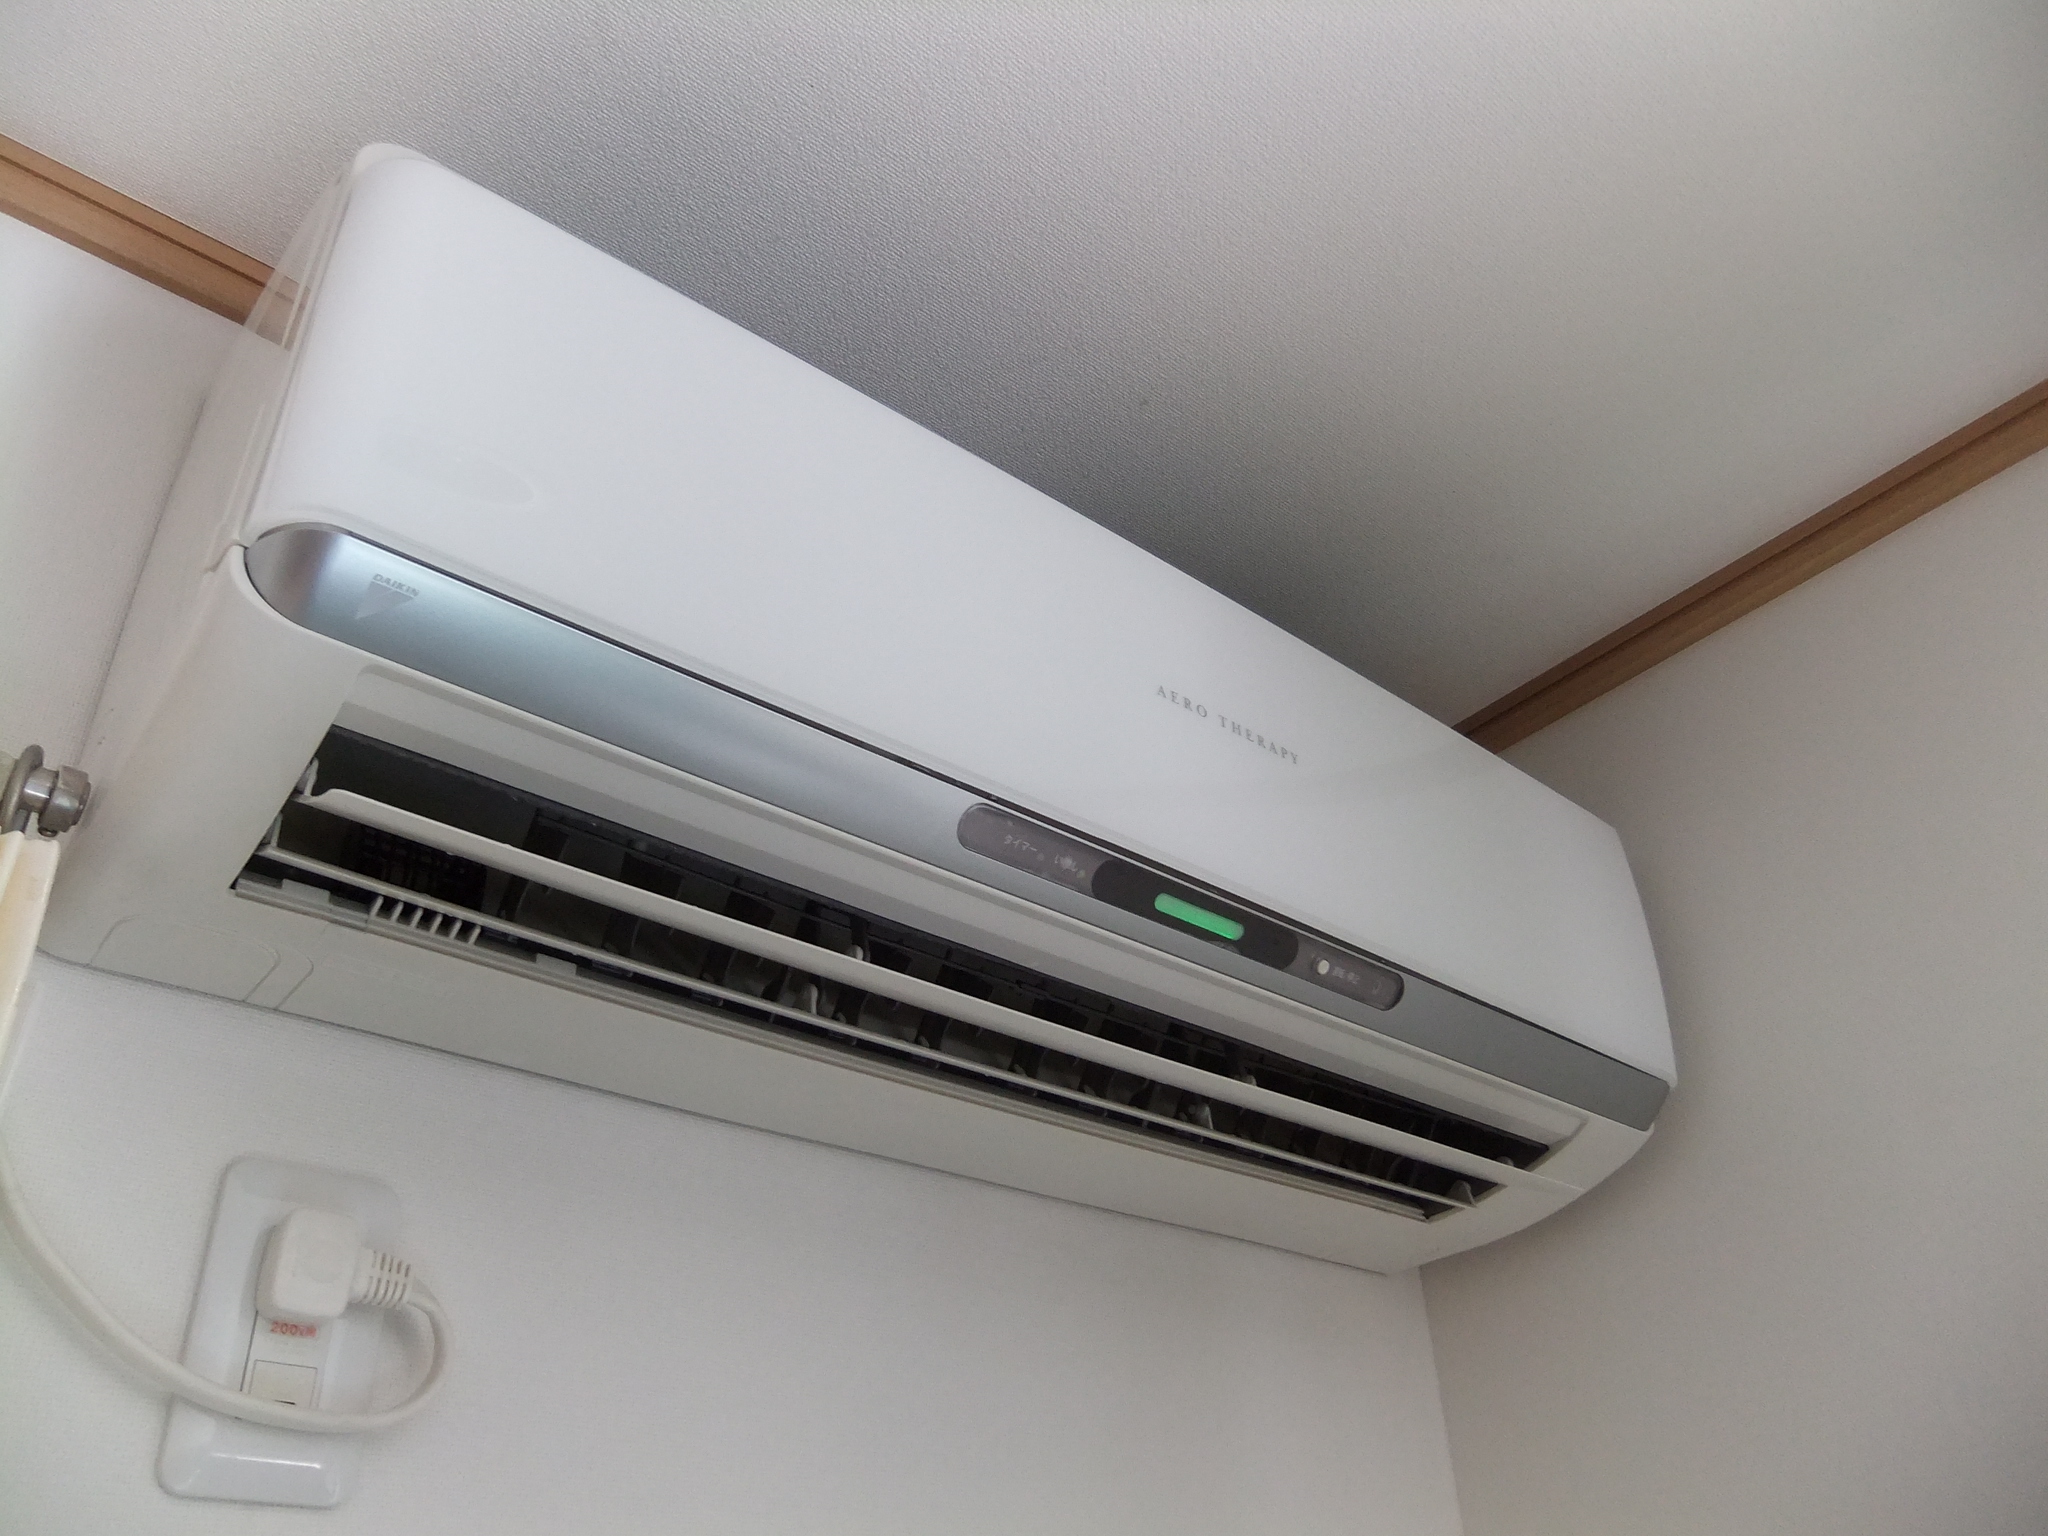 http://ajras.net/images/110629-aircon2.jpg